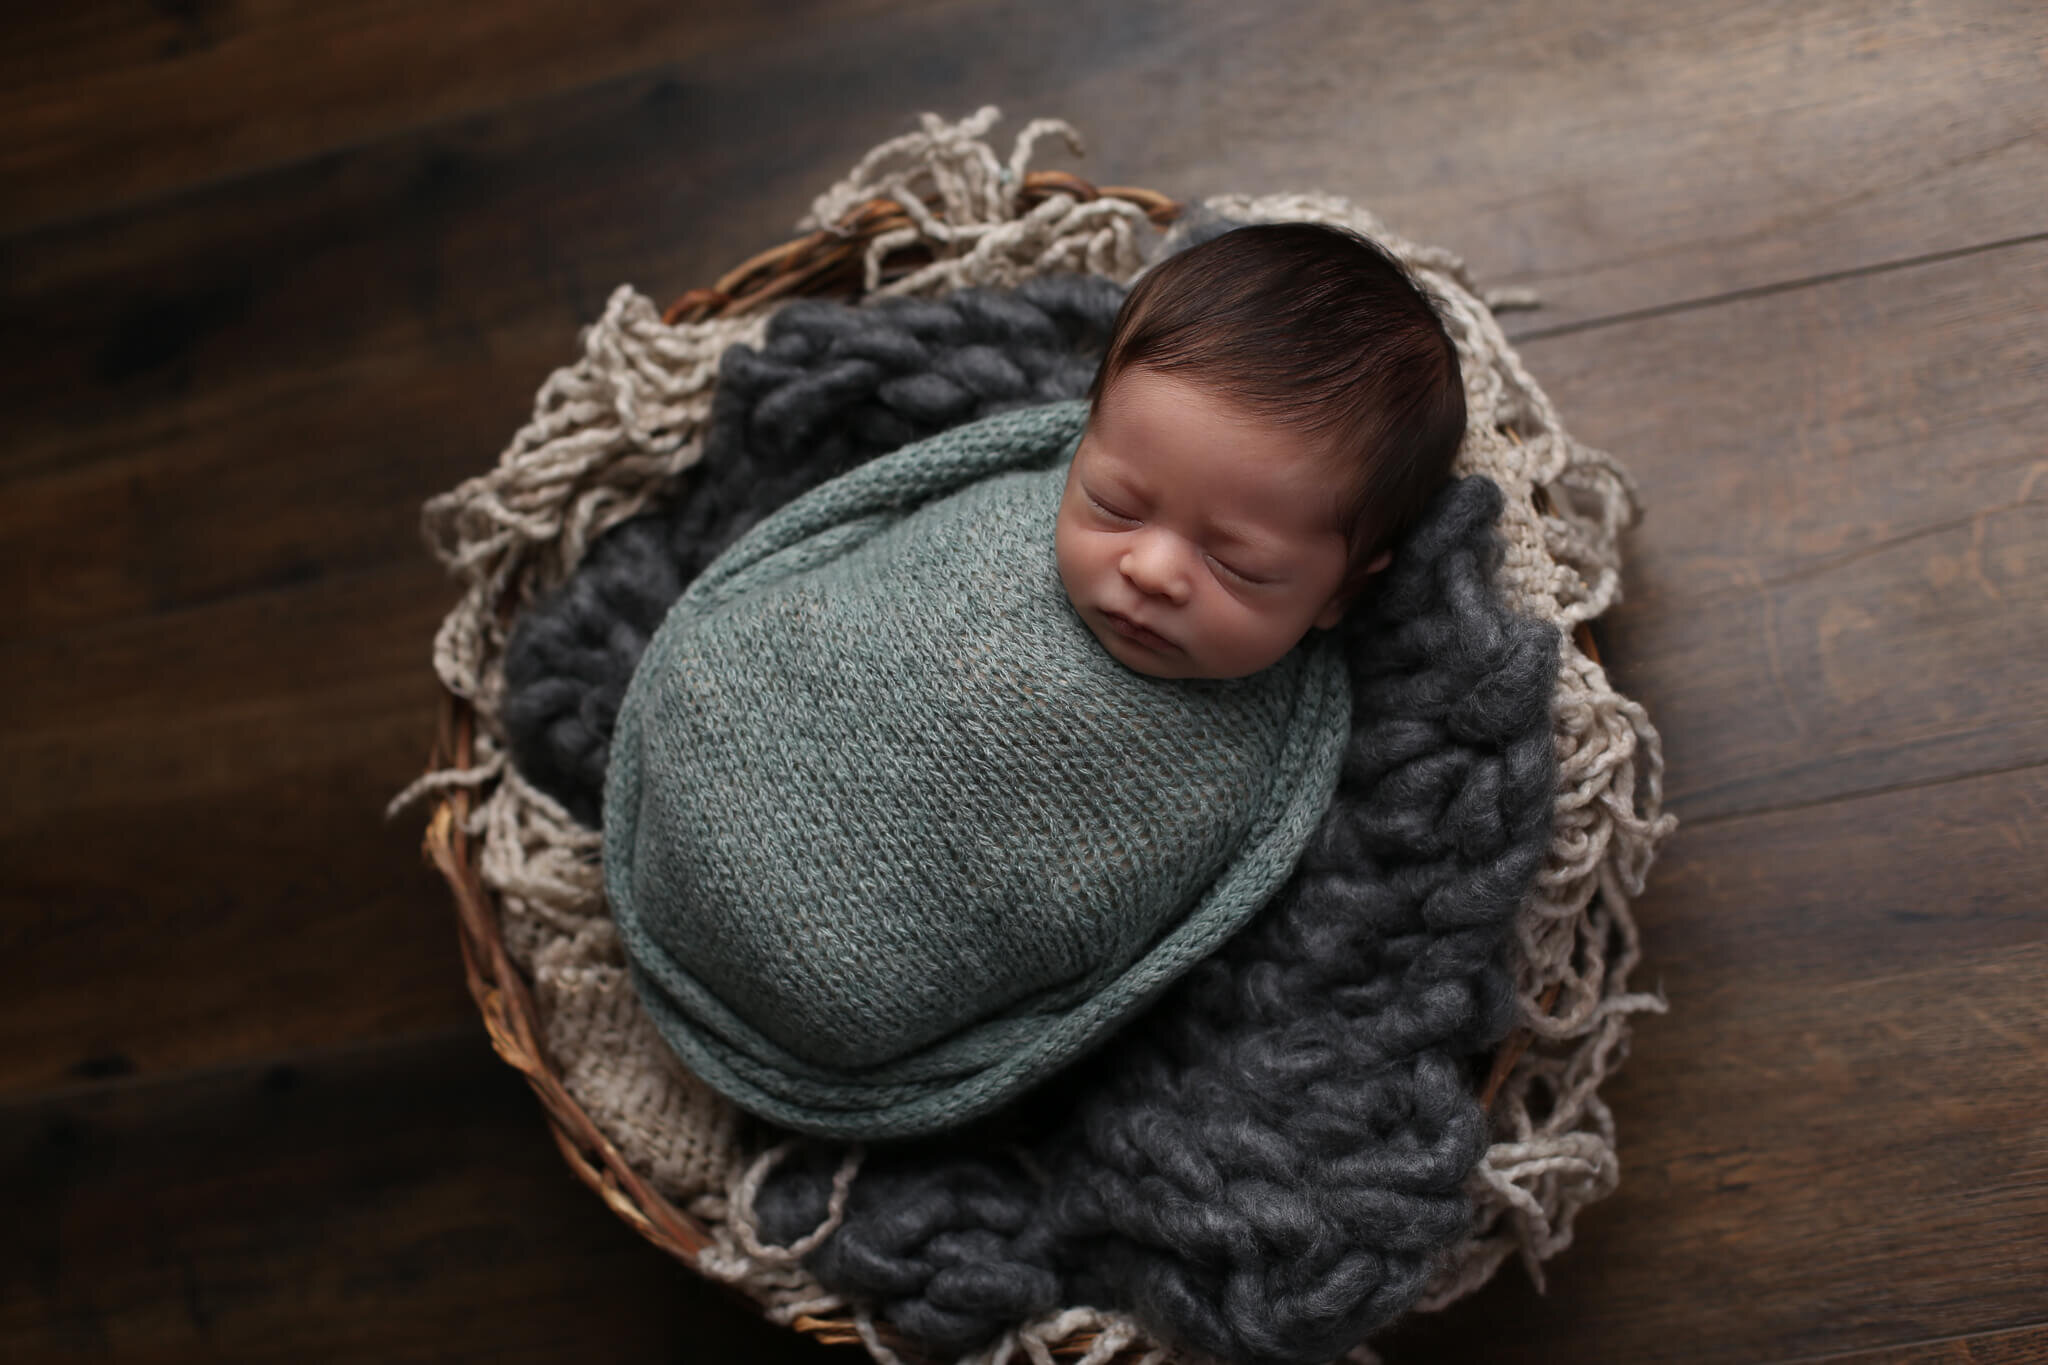  A photograph of a tiny newborn wrapped up in a knitted blanket, sleeping in a basket lined with cozy blankets from a baby photo session 